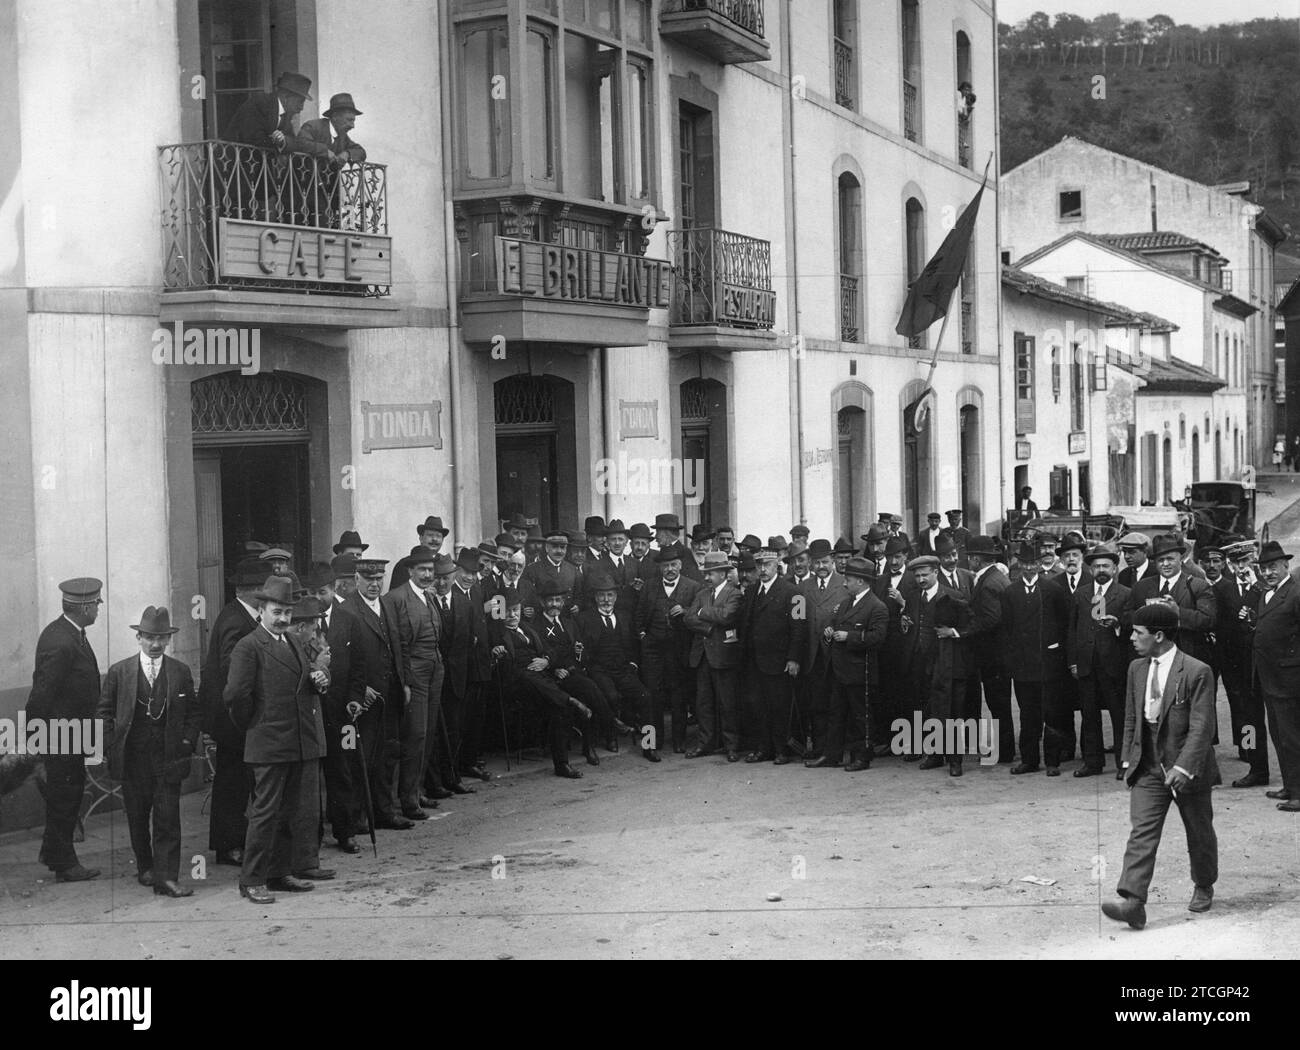 04/30/1917. The trip of the Minister of Public Works. The Duke of Almodóvar del Valle (X) in San Esteban de Pravia, accompanied by the Authorities - photo by MG Alonso - with a 5 Cent stamp, sent to the director of the Spanish press. Credit: Album / Archivo ABC / Alonso Stock Photo